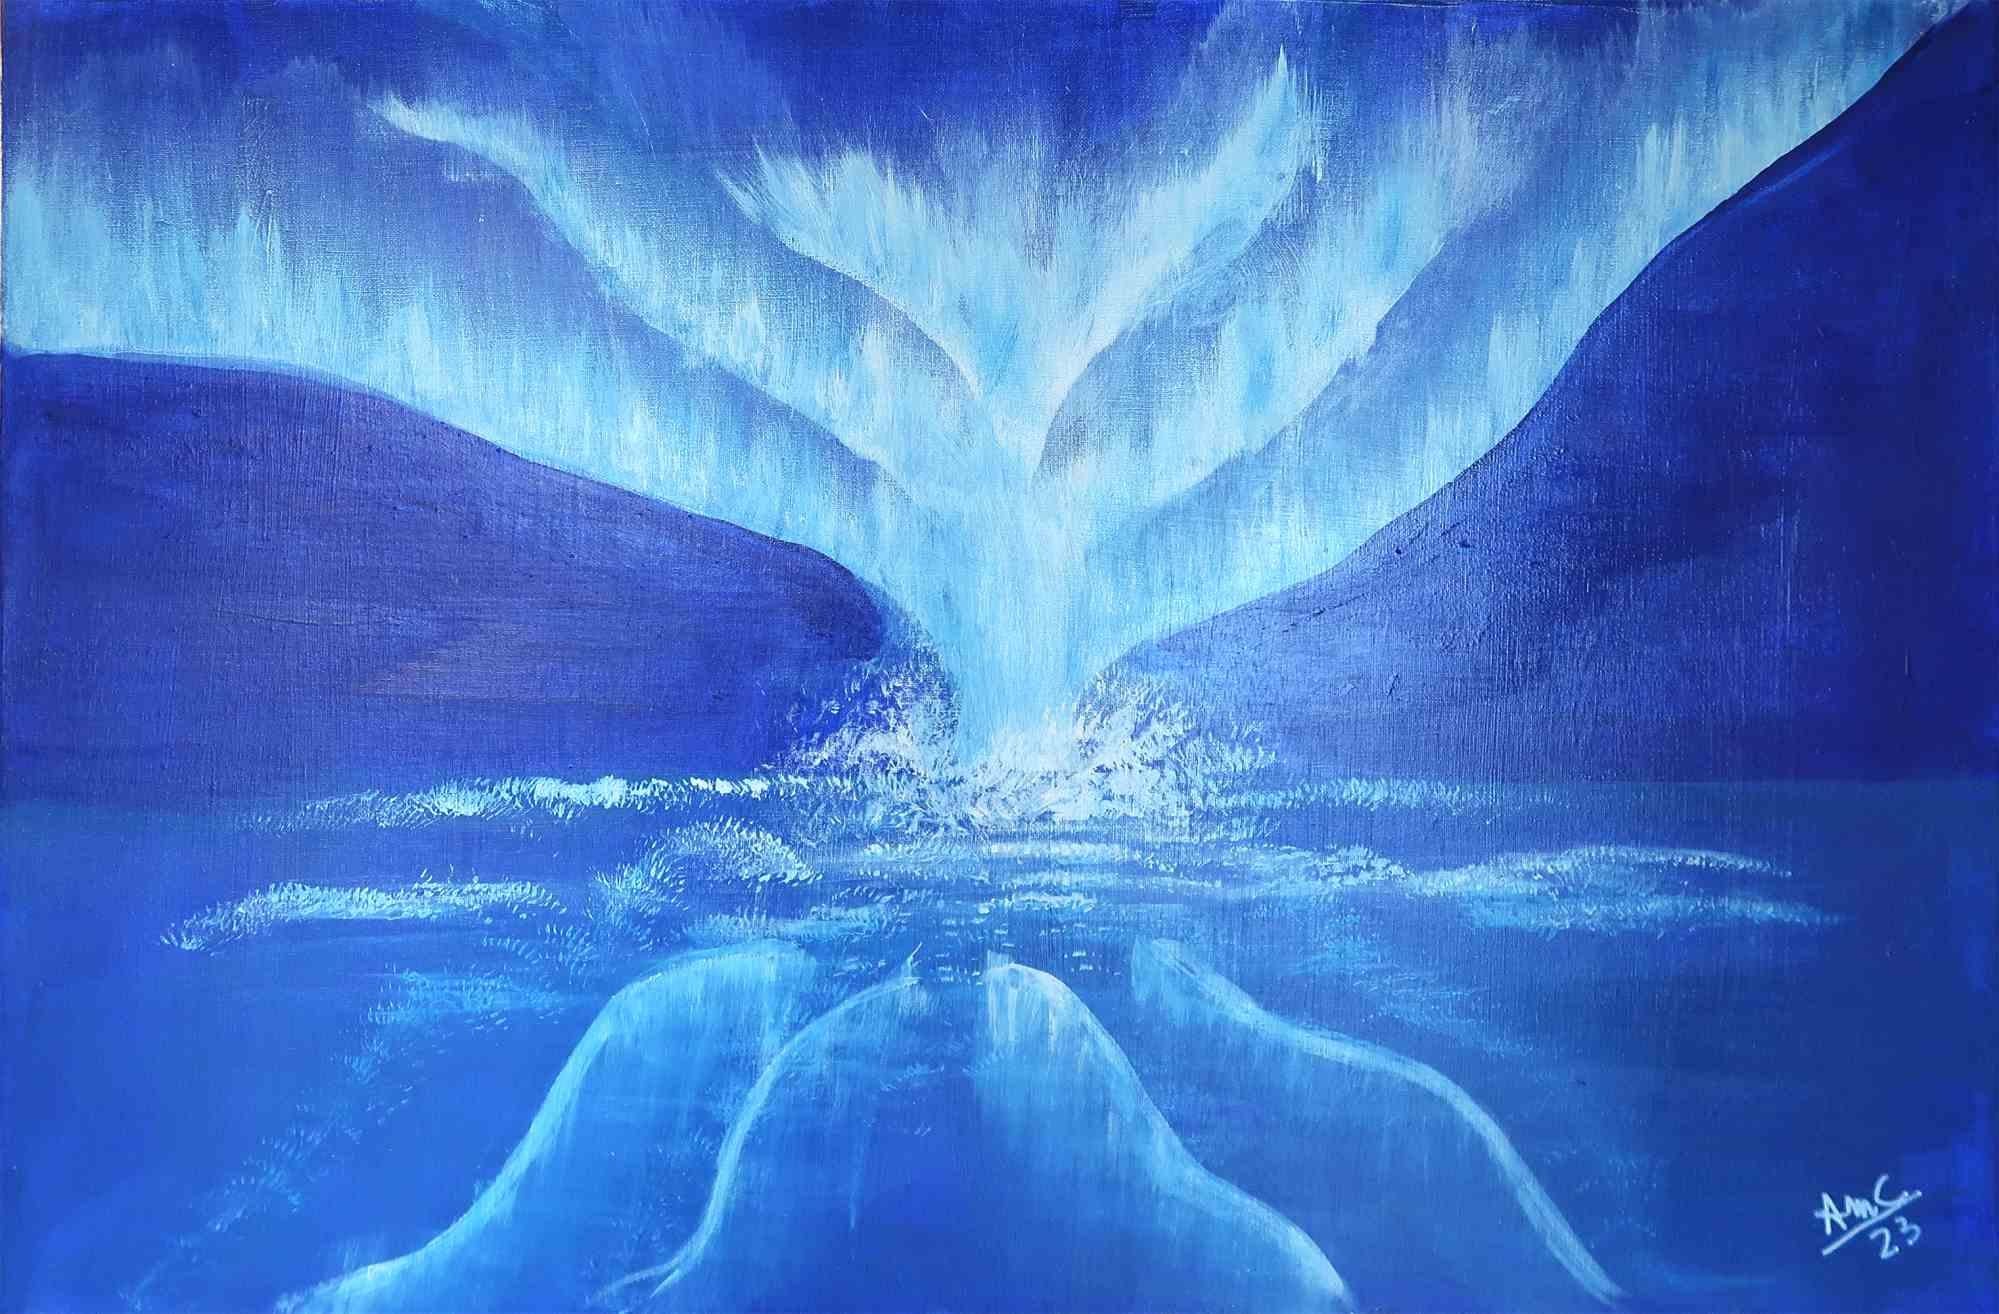 Sea is a wonderful painting by the Italian artist Anna Maria Caboni.

This painting, combining a figurative seascape with abstract elements, depicts an outburst in the middle of an infinite ocean that summons unearthly creatures in a fascinating